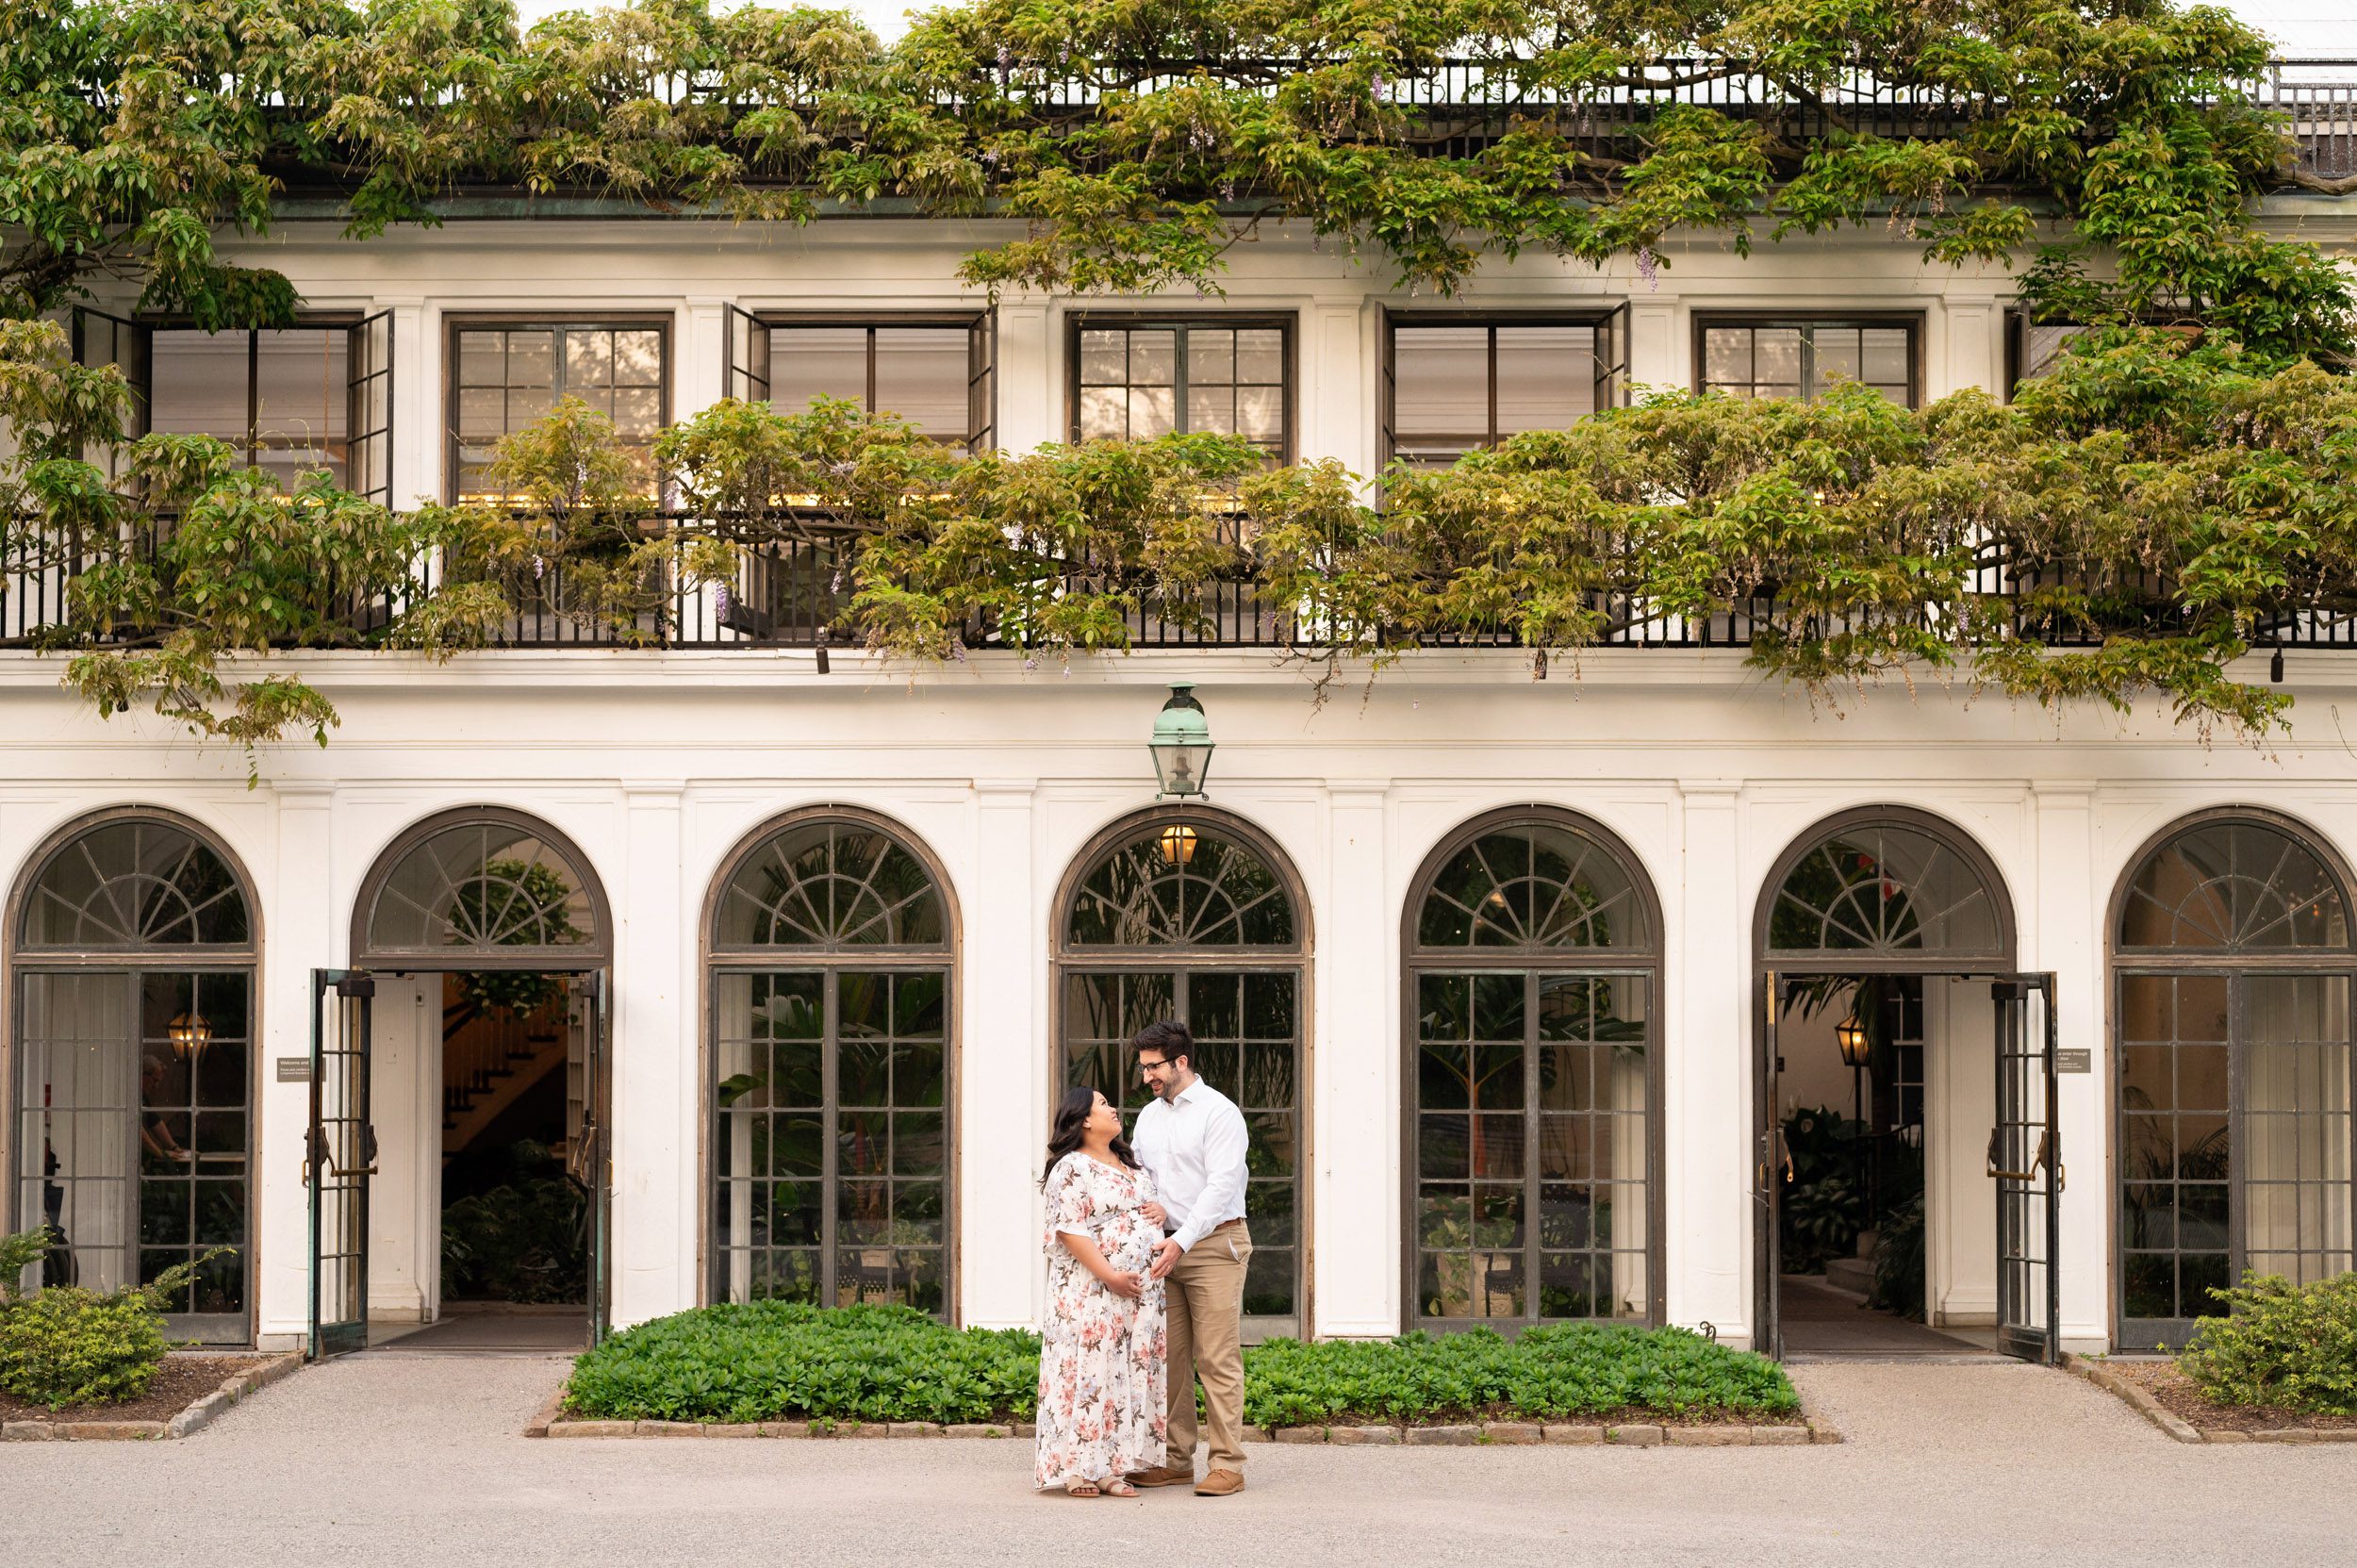 an expecting couple standing in front of Dupont's House at Longwood Gardens with the big white arches and green wisteria vines growing across the building in the backdrop during a maternity photography session